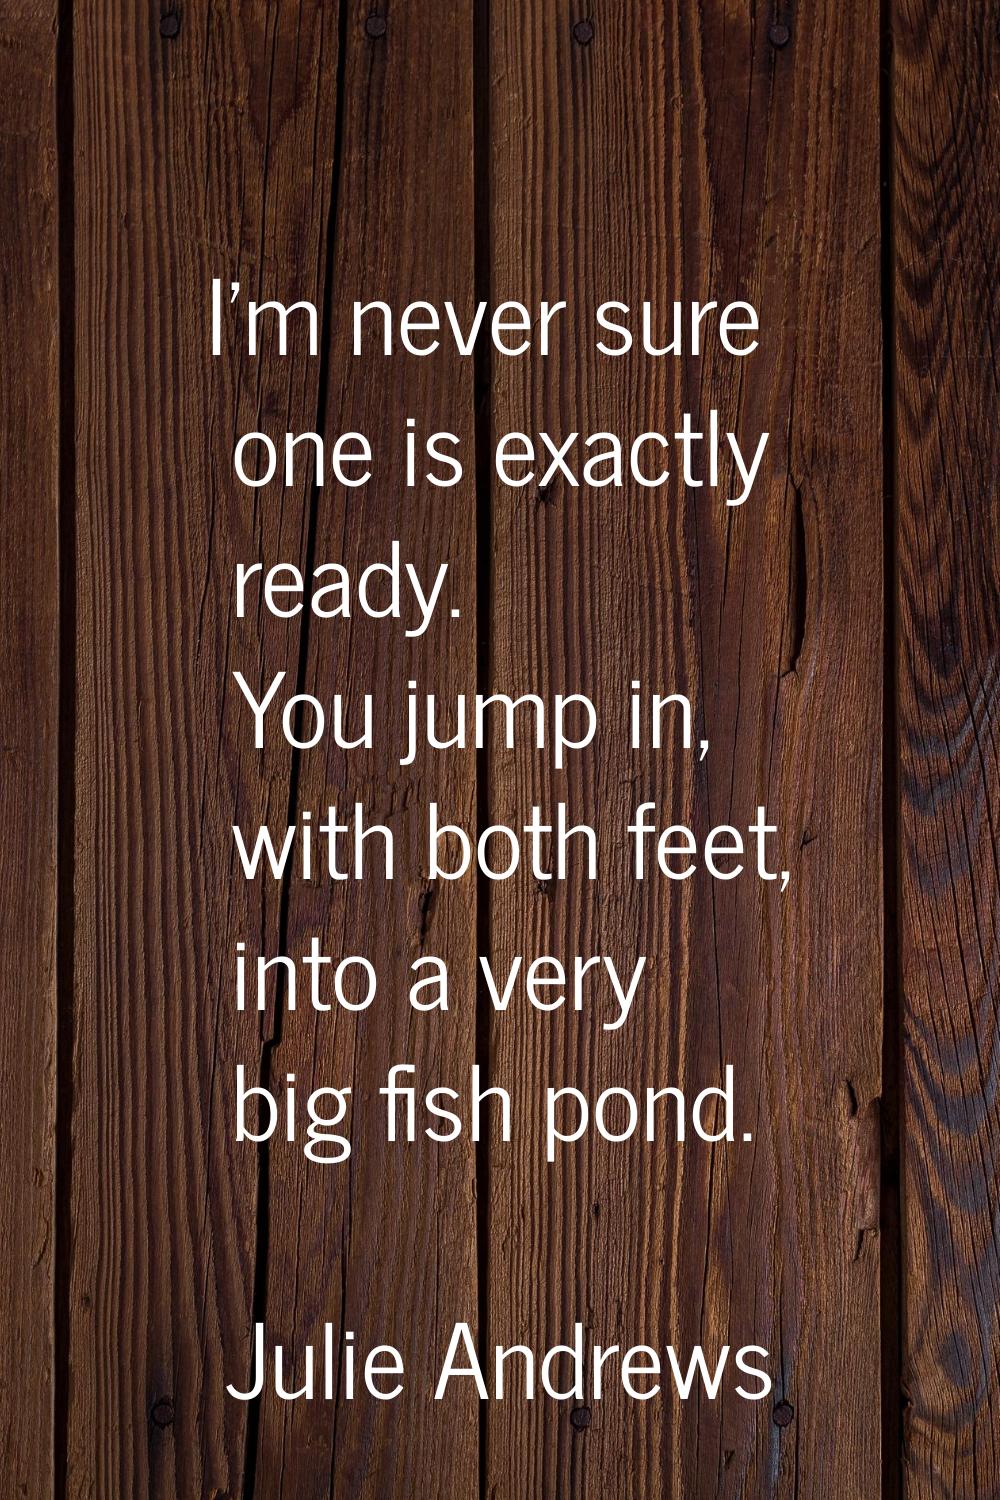 I'm never sure one is exactly ready. You jump in, with both feet, into a very big fish pond.